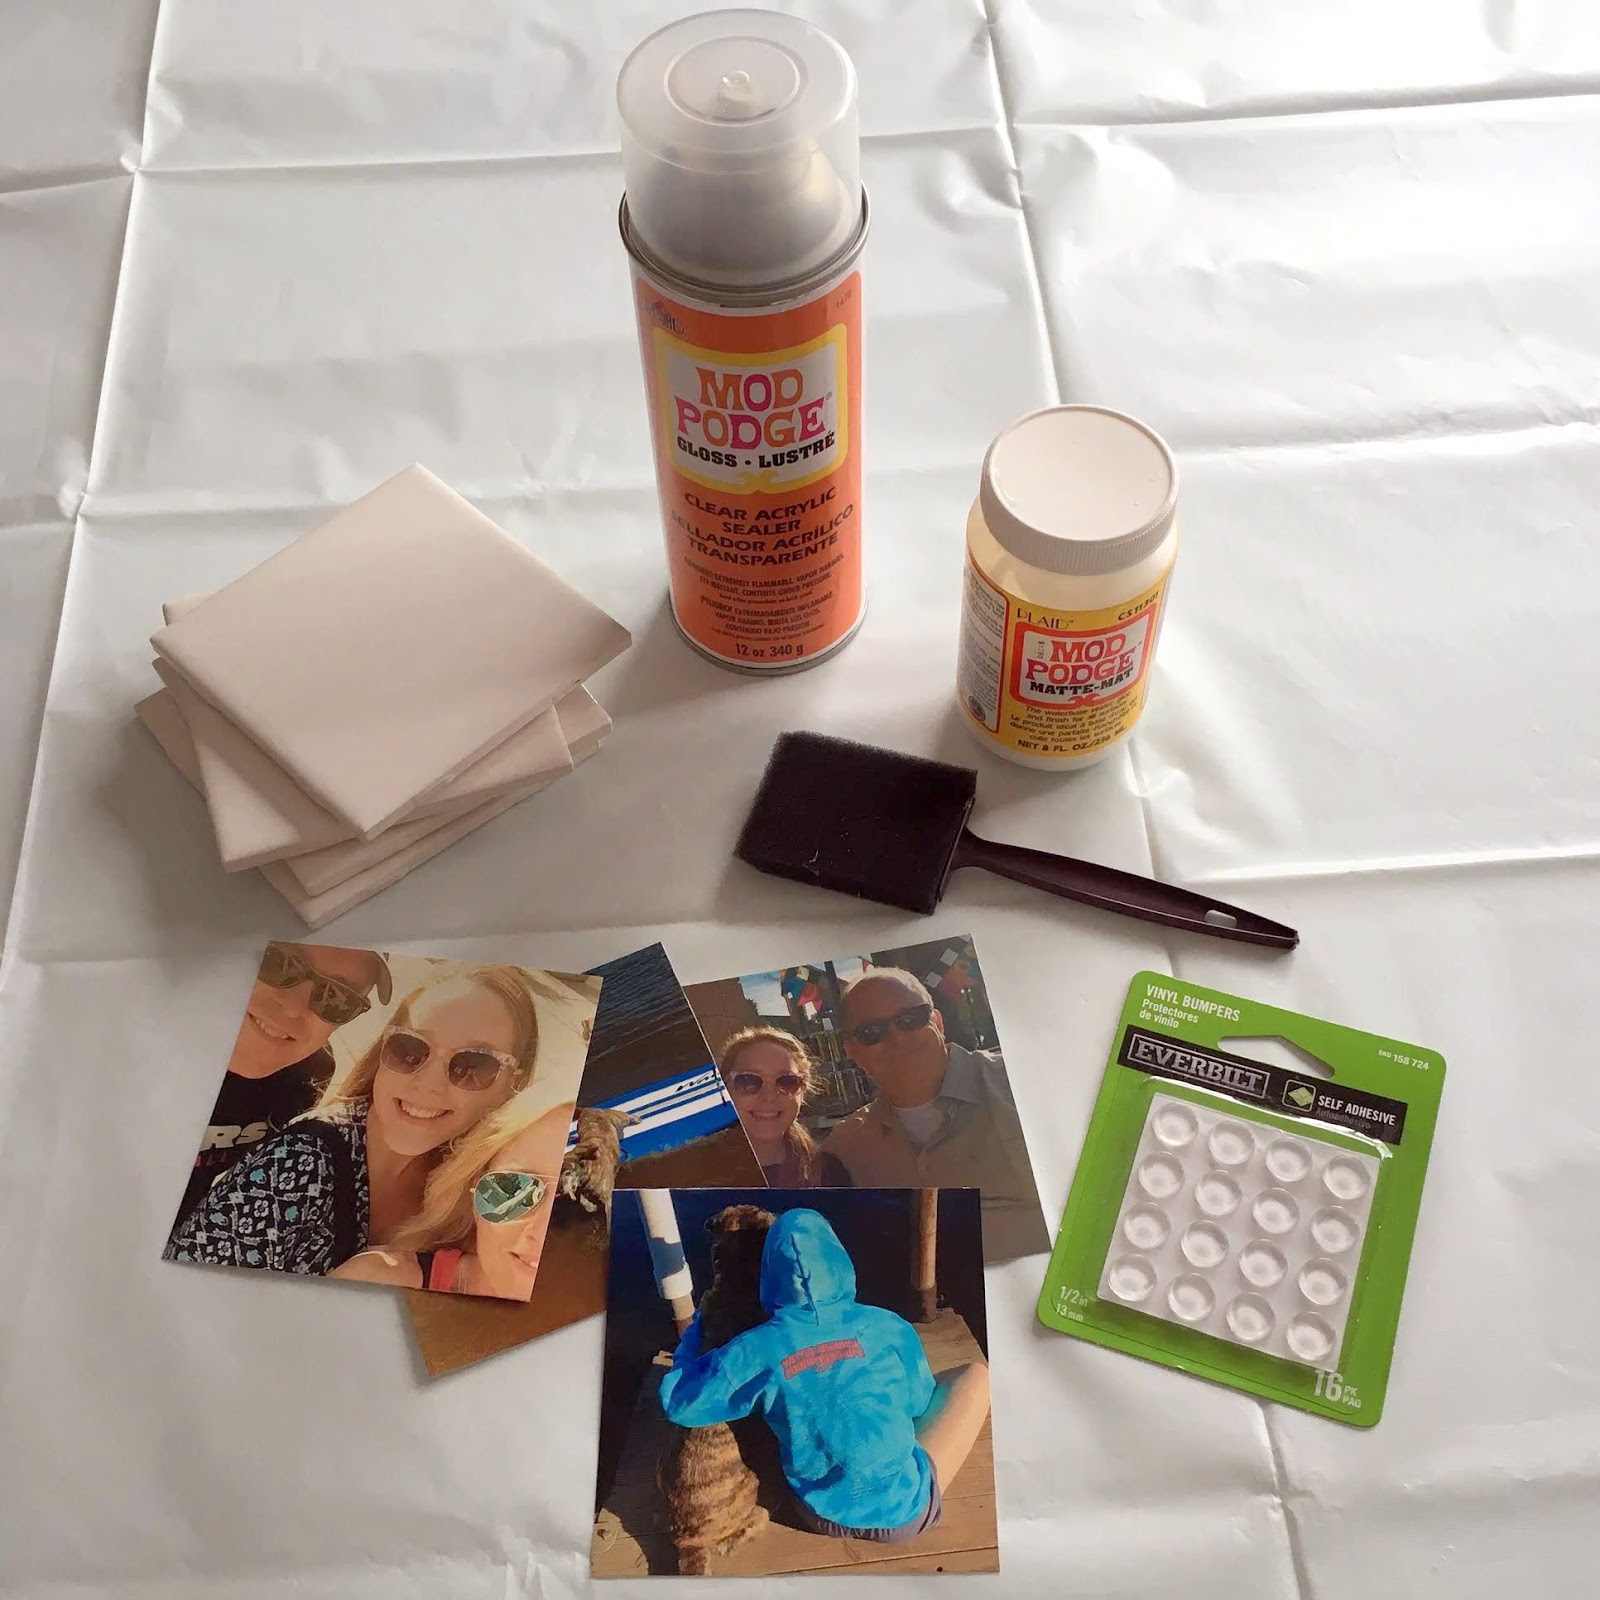 Supplies to make personalized photo coasters